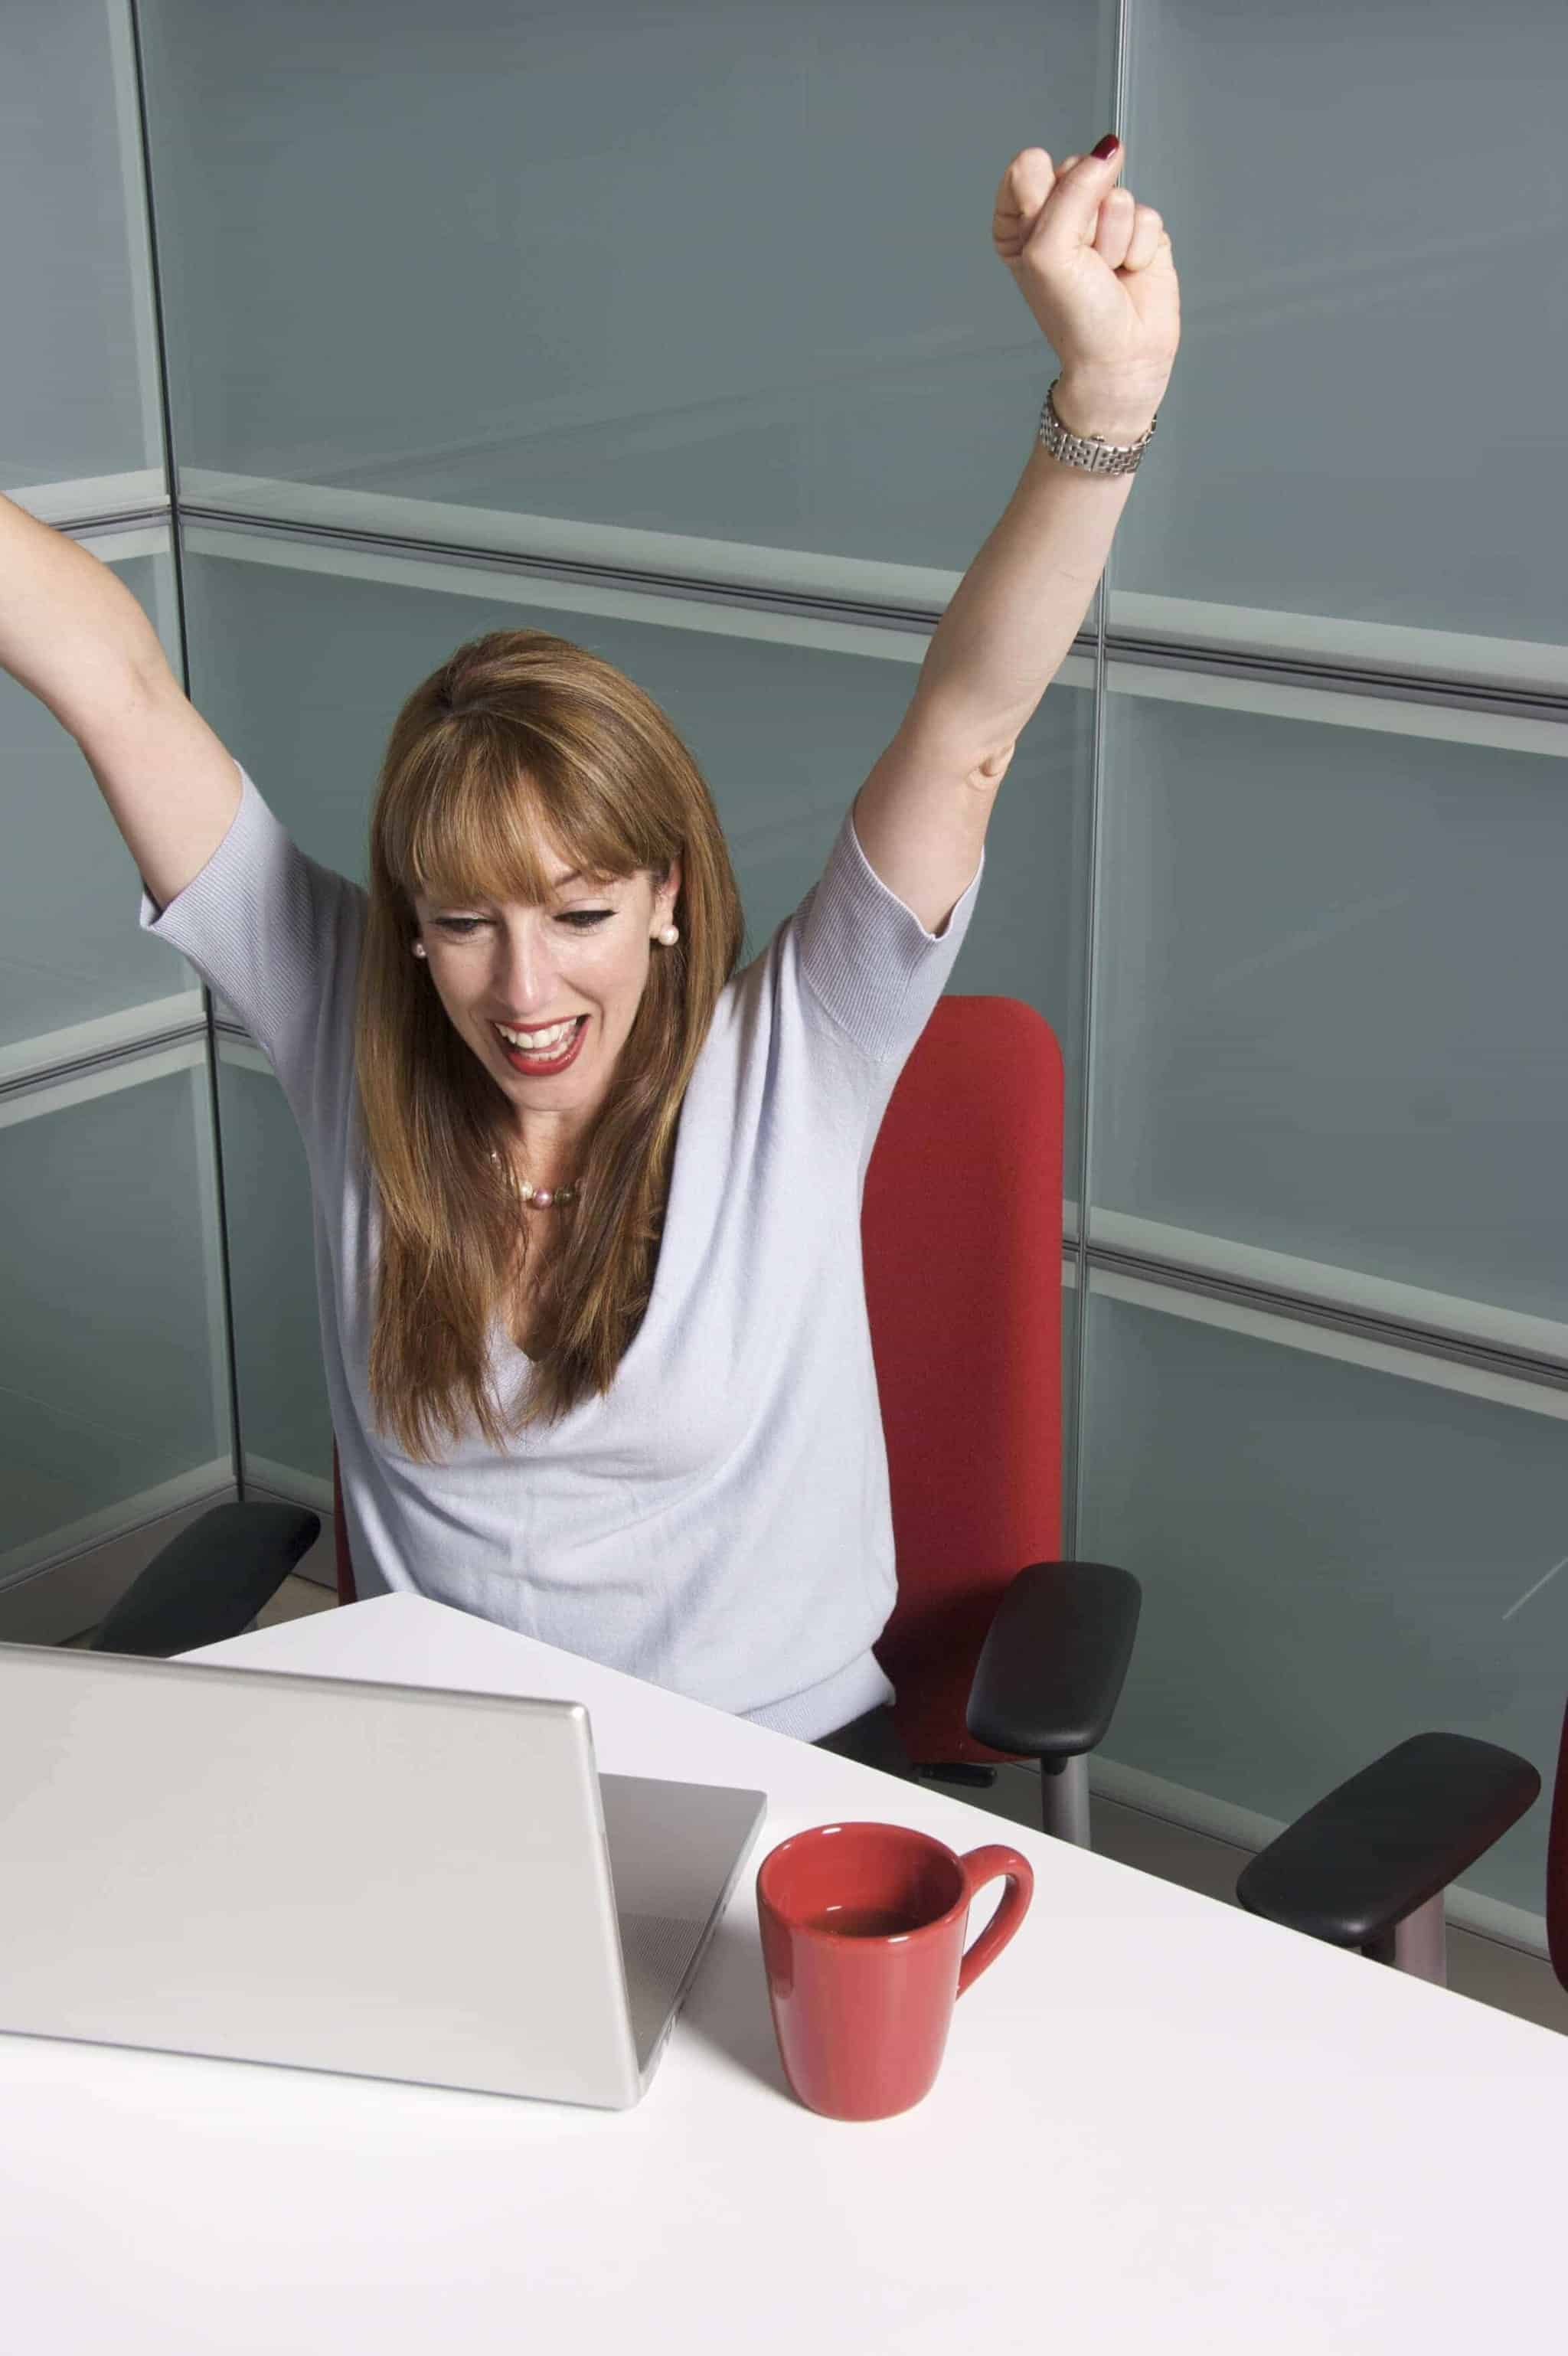 Woman in the office is pleased, probably about a royalty-free download